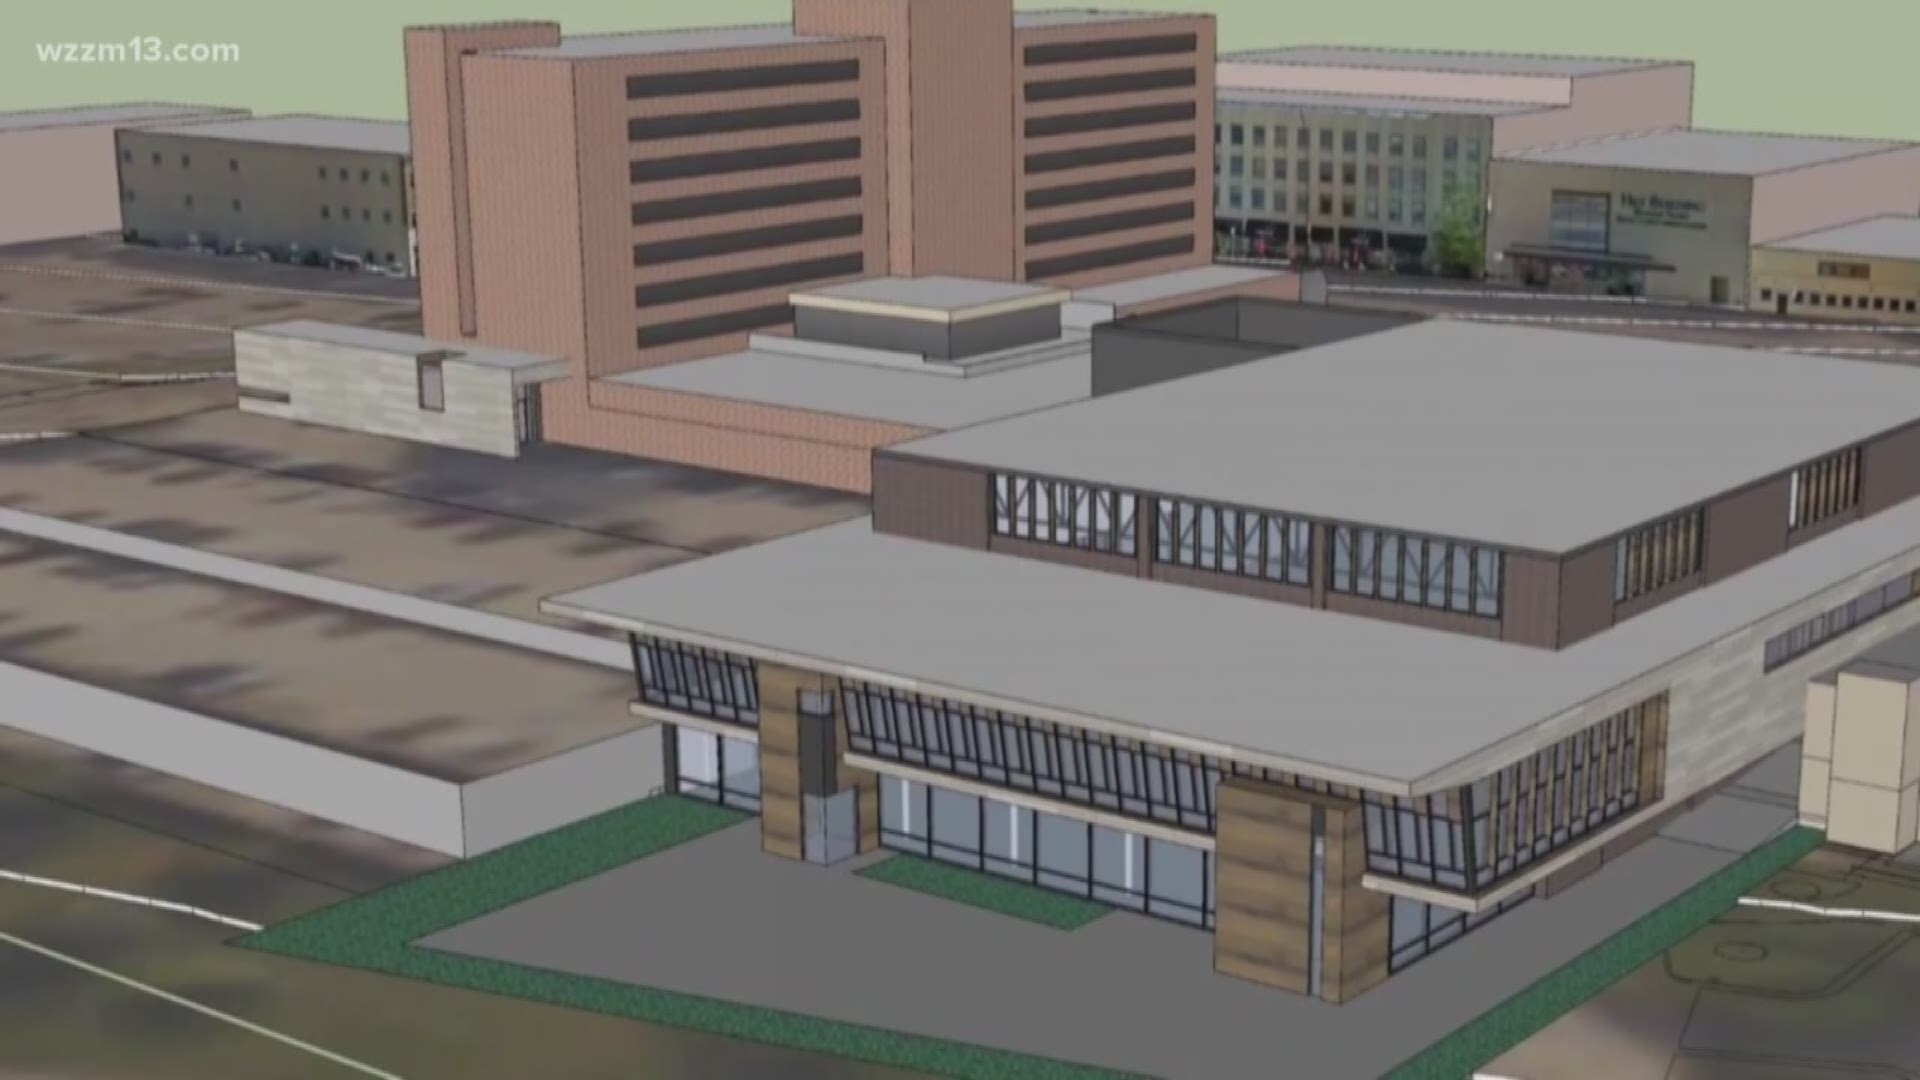 Groundbreaking scheduled for Muskegon convention center